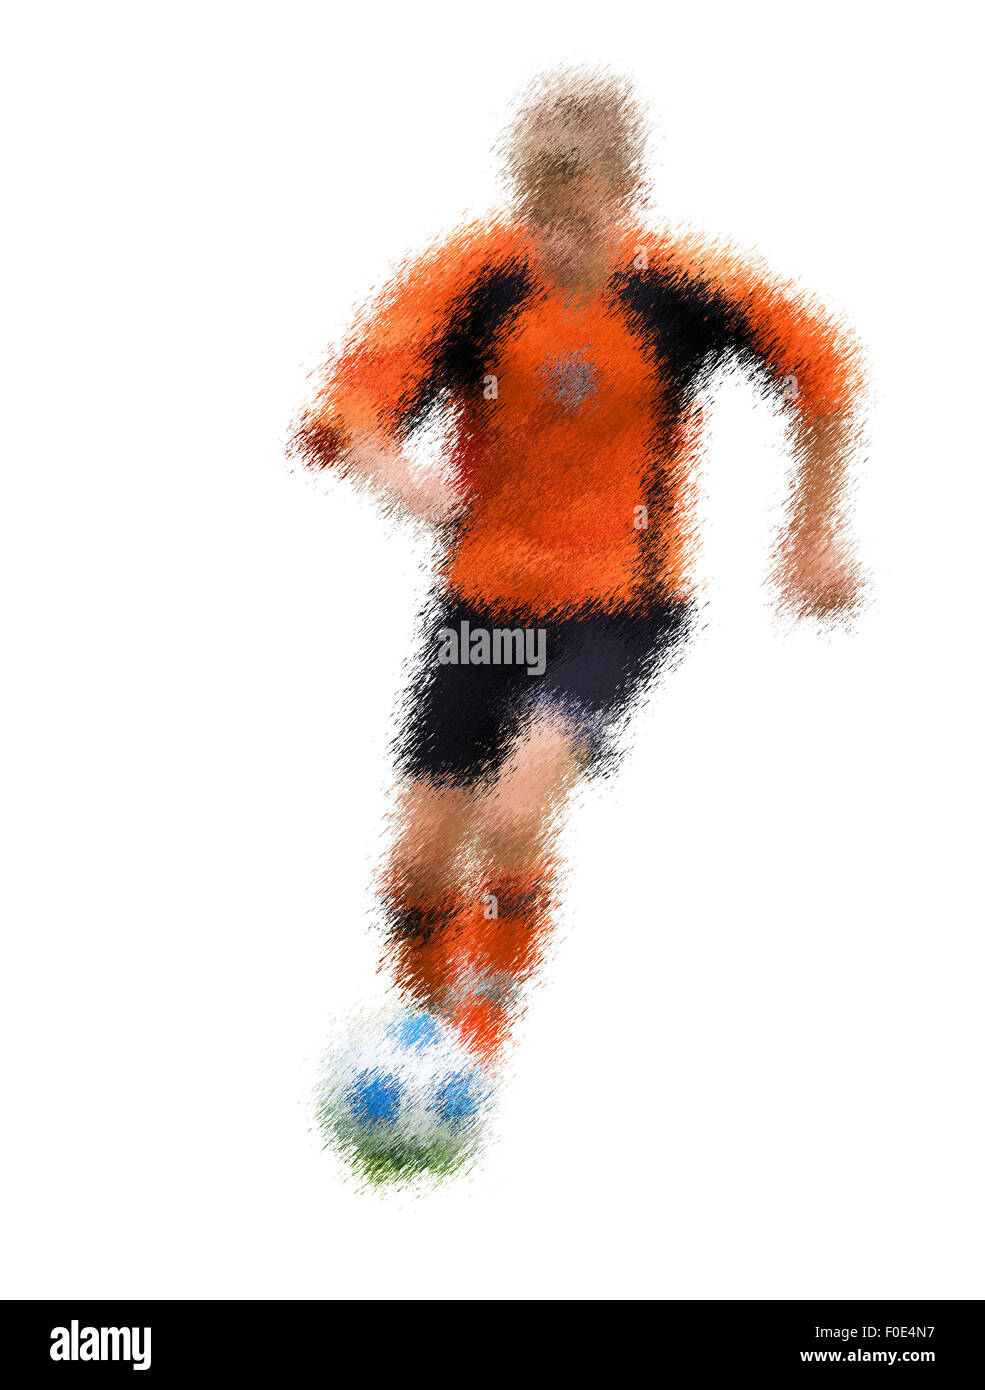 Orange forward. Abstract digital illustration of soccer football players, teenagers around 15 years old, in action isolated on w Stock Photo